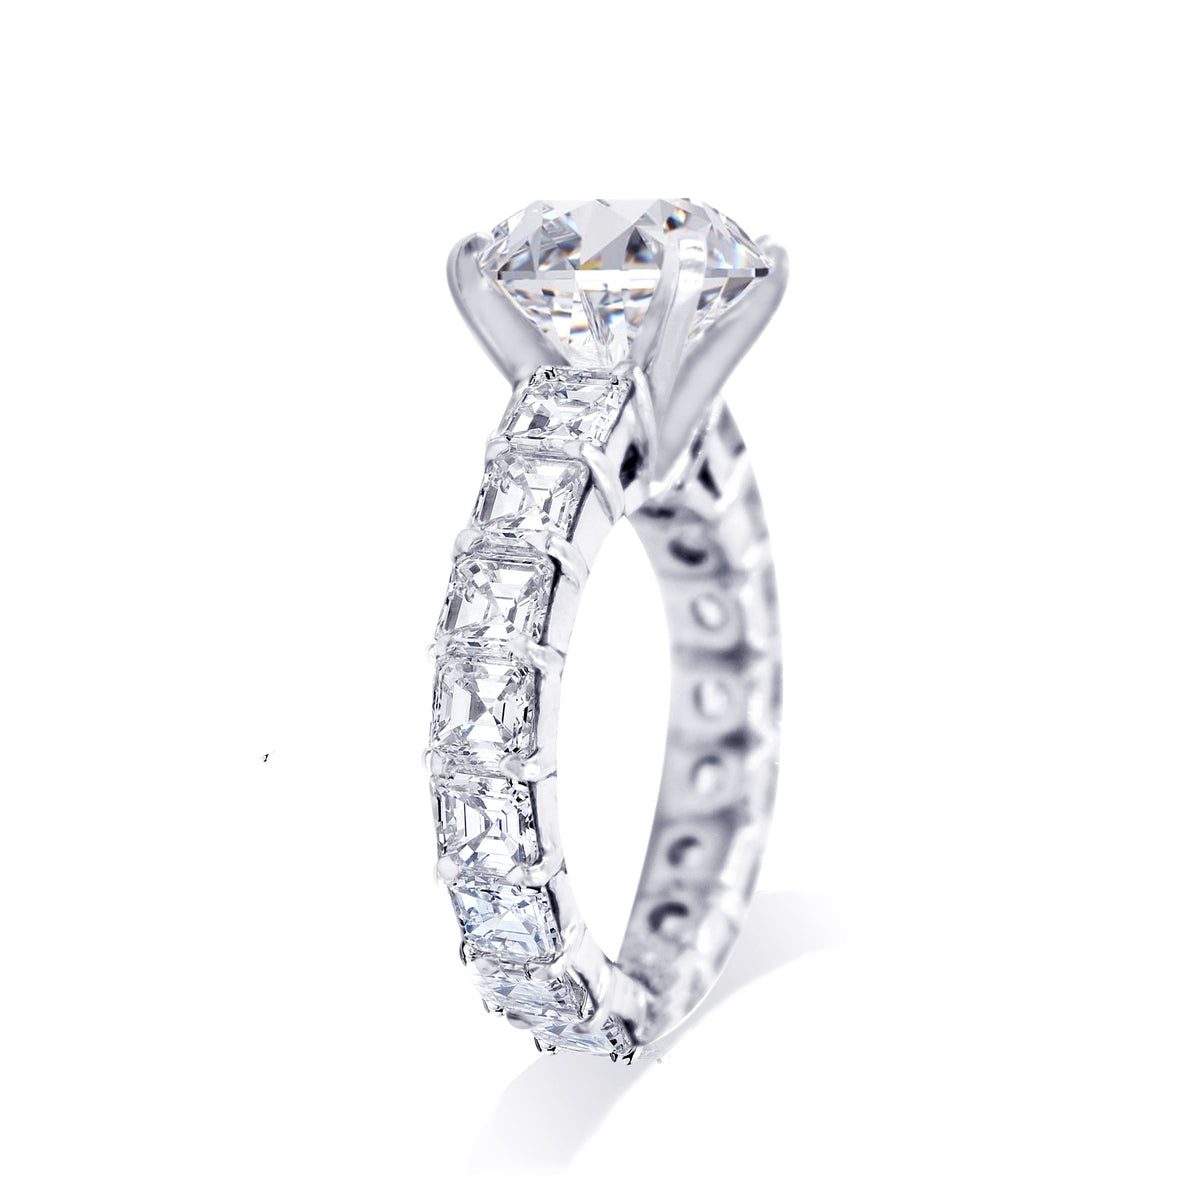 JB Star Platinum Diamond Ring with Round Brilliant Cut Center and Assher Eternity Band